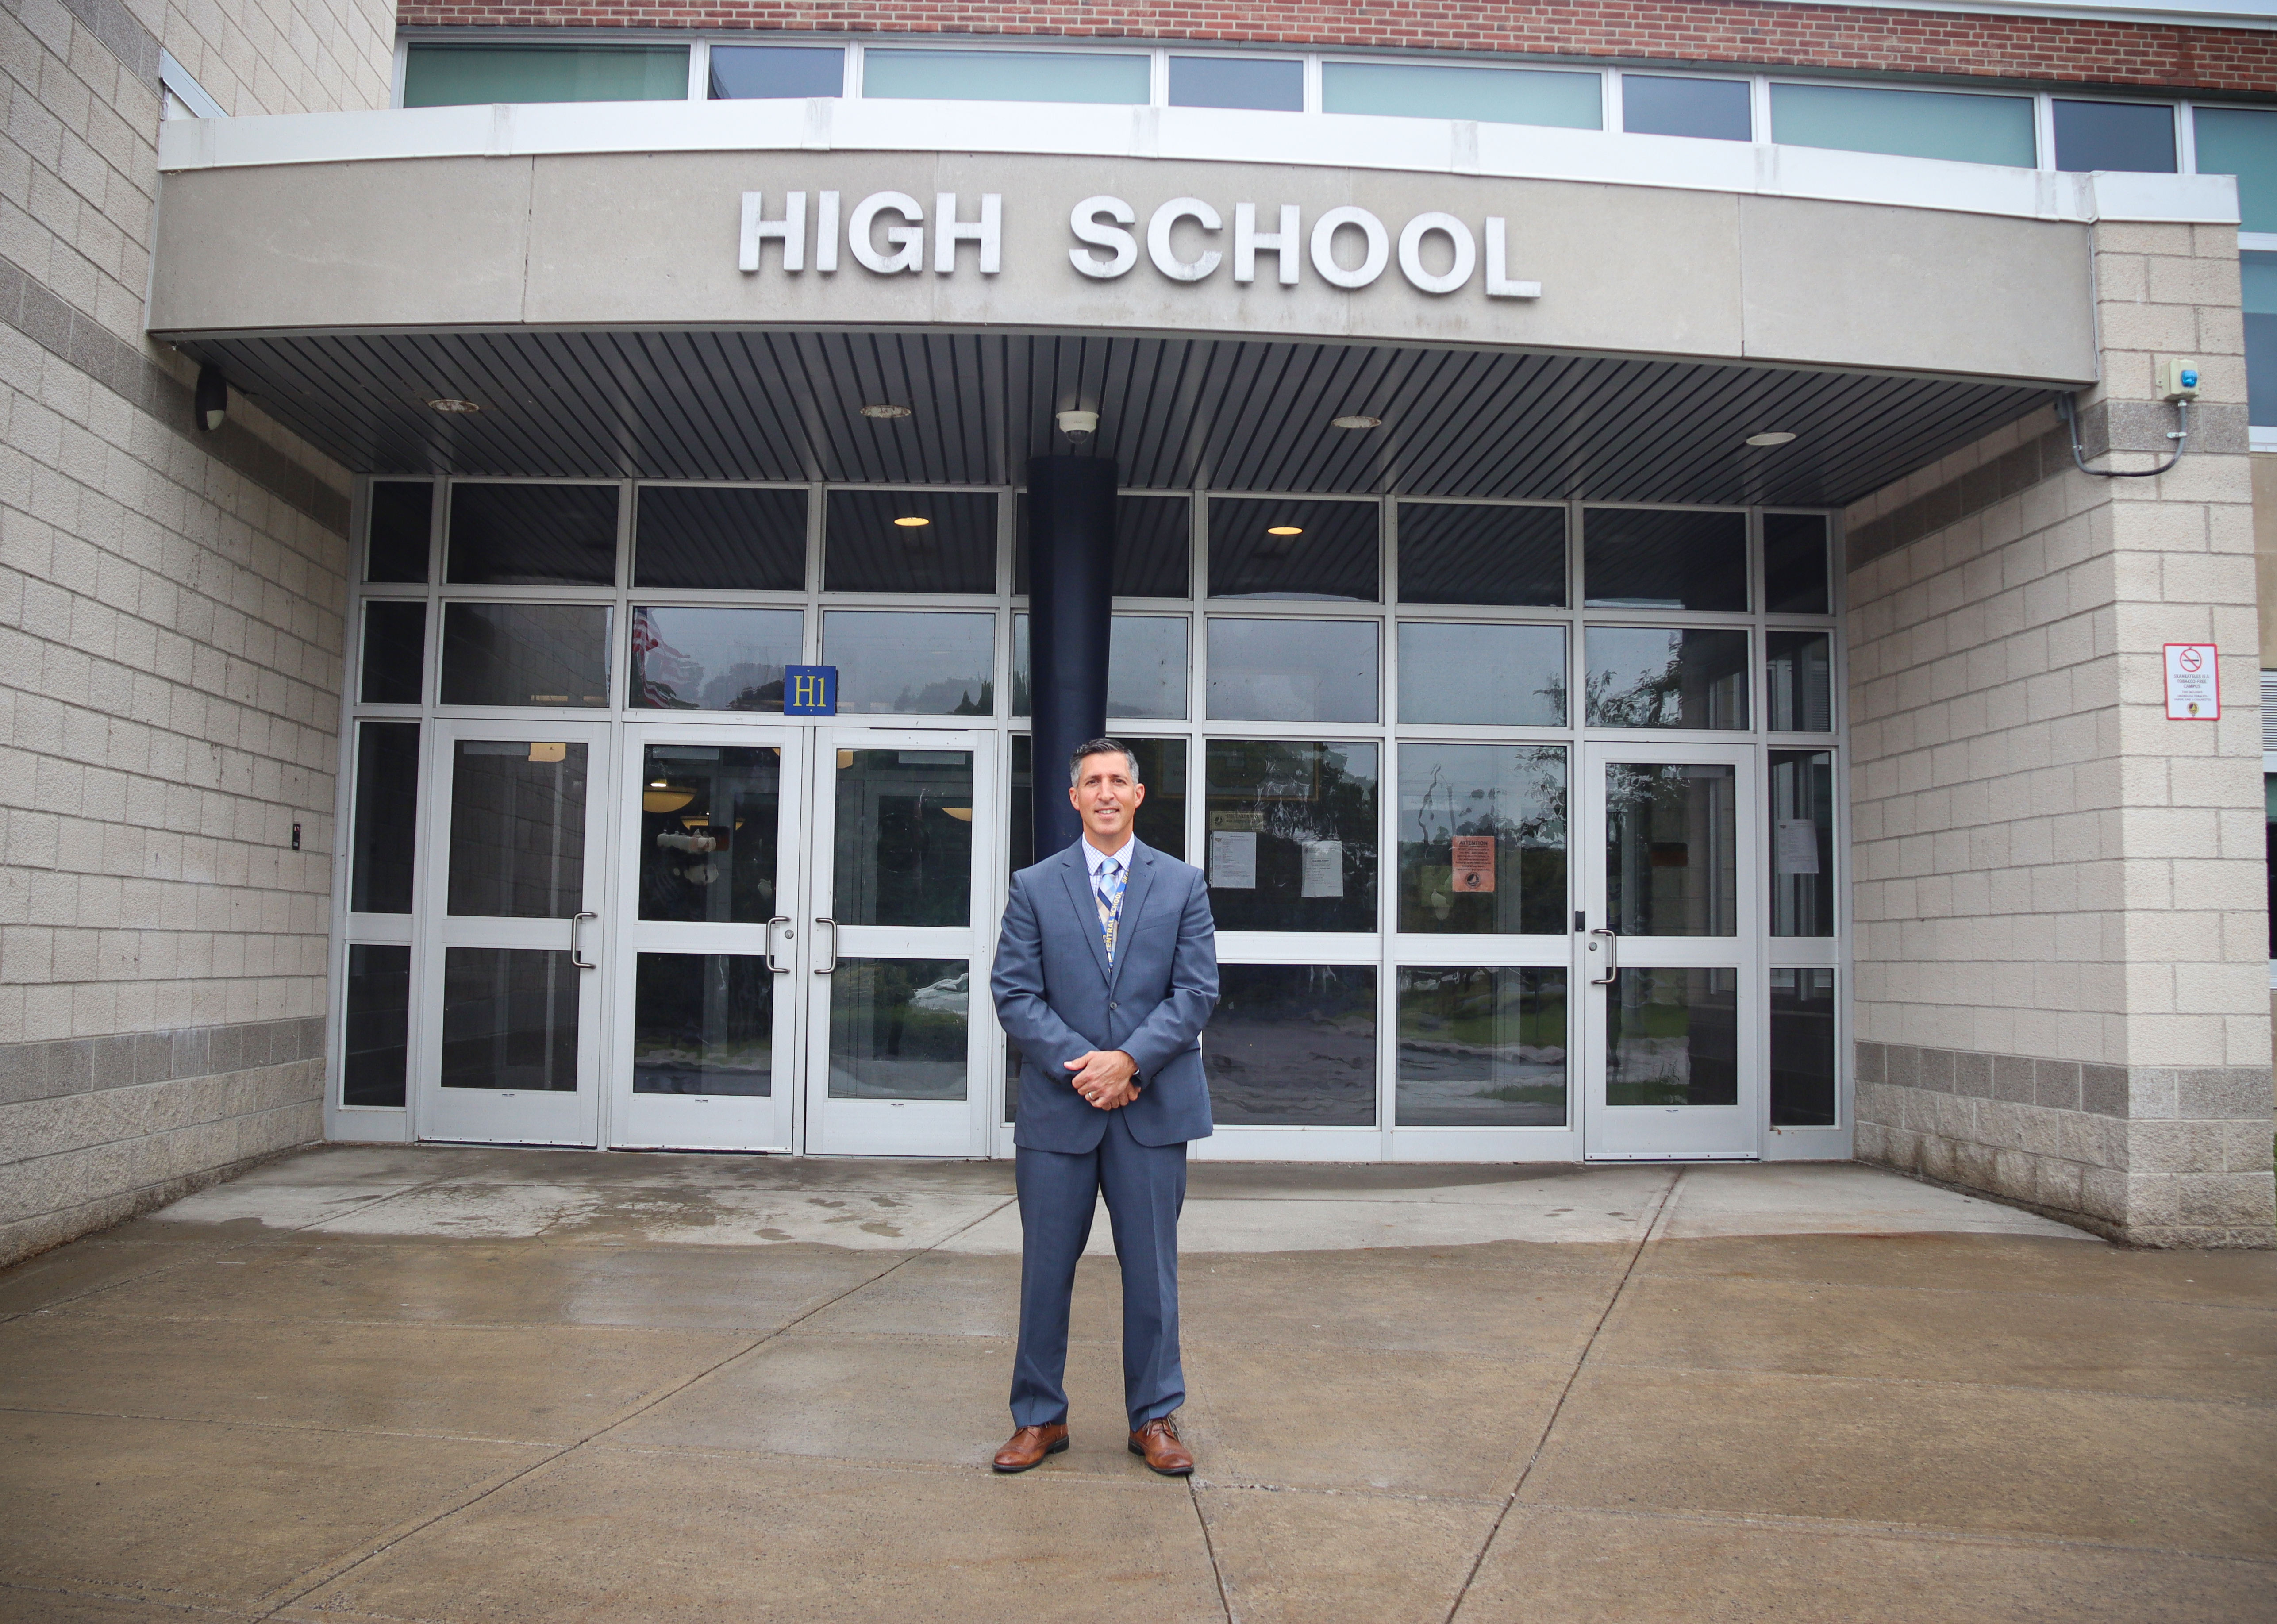 Michael Caraccio stands in front of High School building